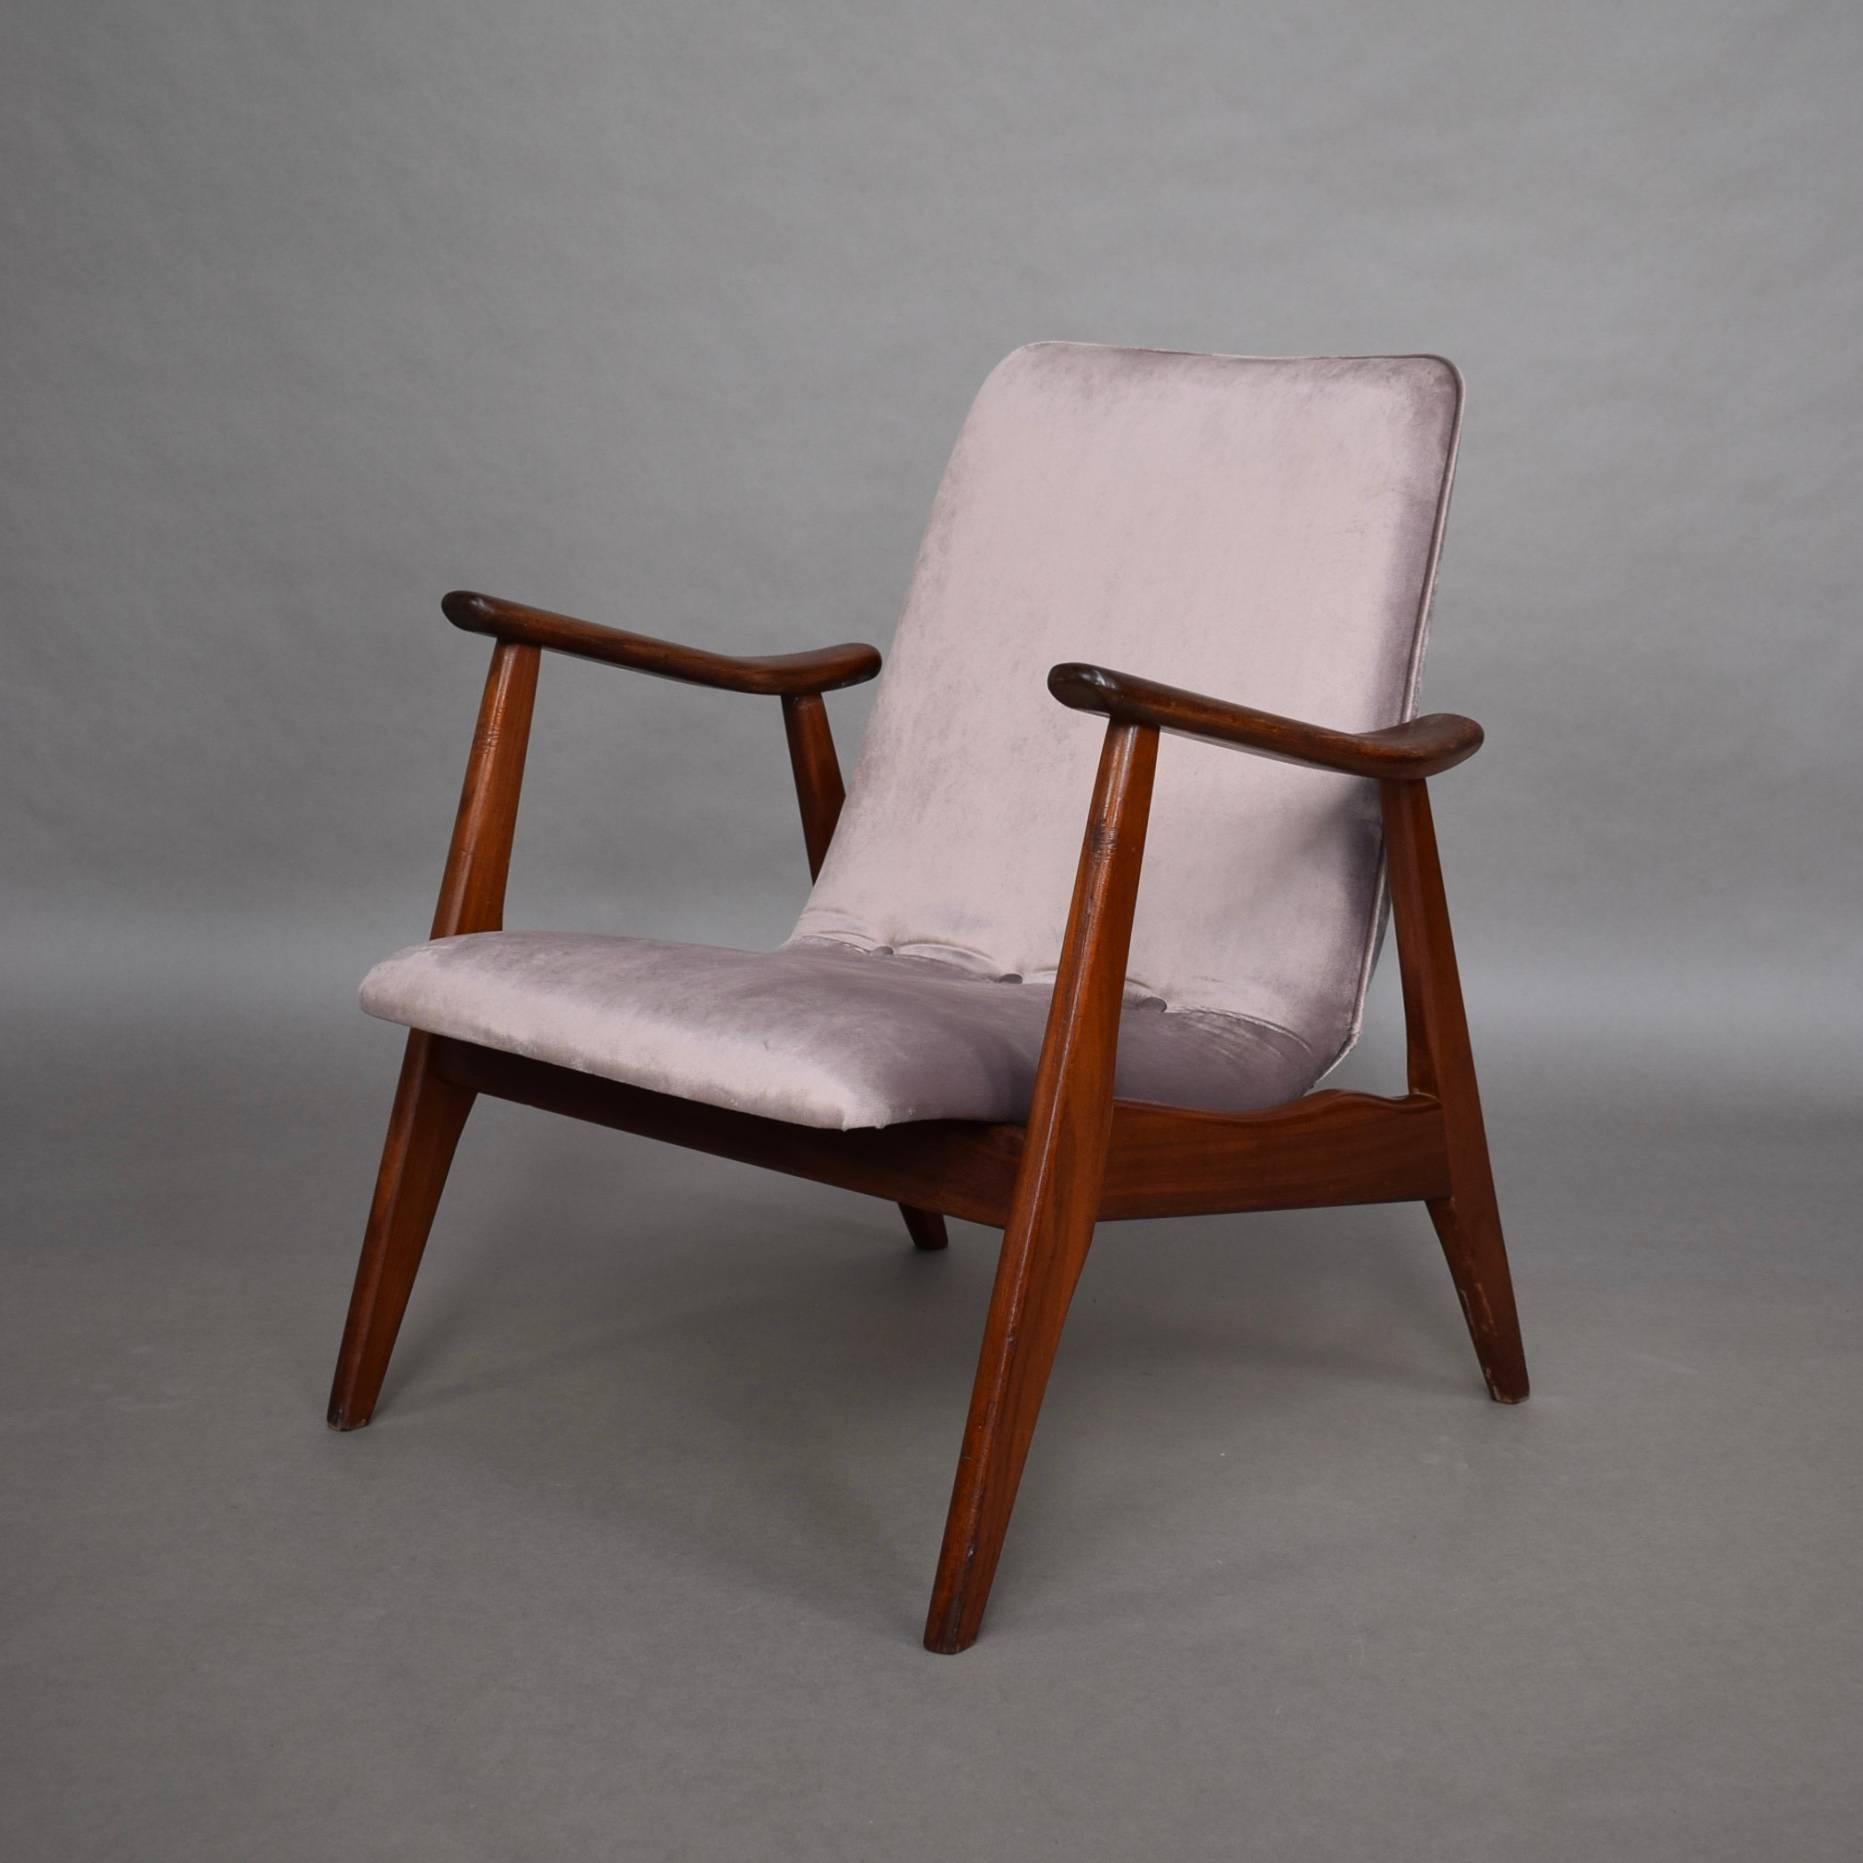 Beautiful pair of Dutch design lounge chair by Louis Van Teeffelen, 1960s. The chairs are made of solid teak and are reupholstered with a beautiful trendy vintage pink velvet fabric. 
We have multiple chairs available (in different colors).
It is